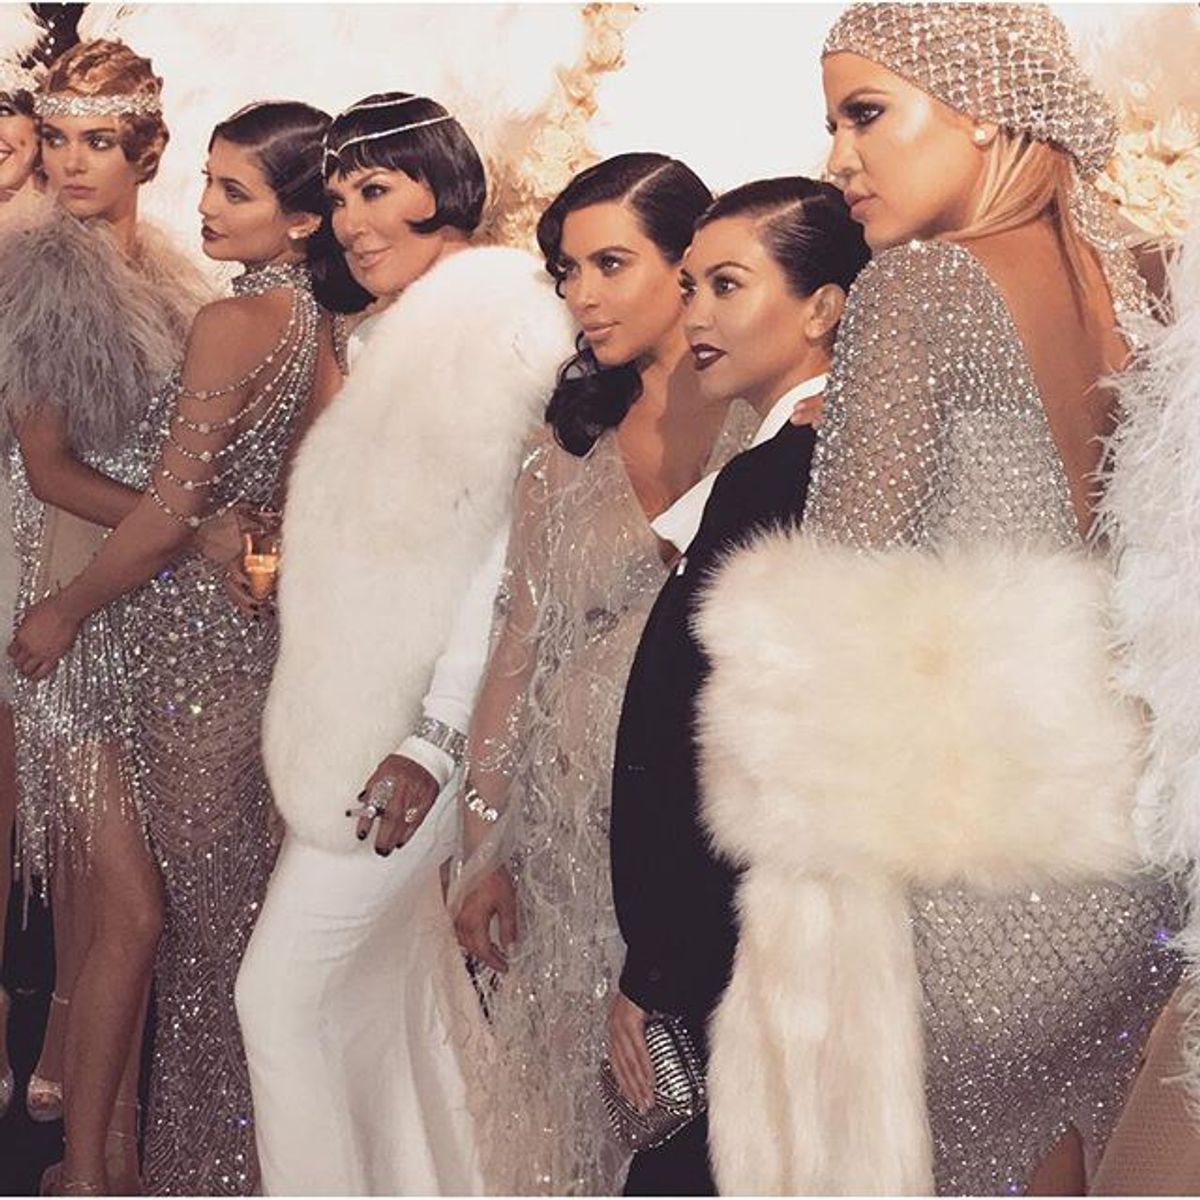 The Real Reasons Why The Kardashians Are Famous